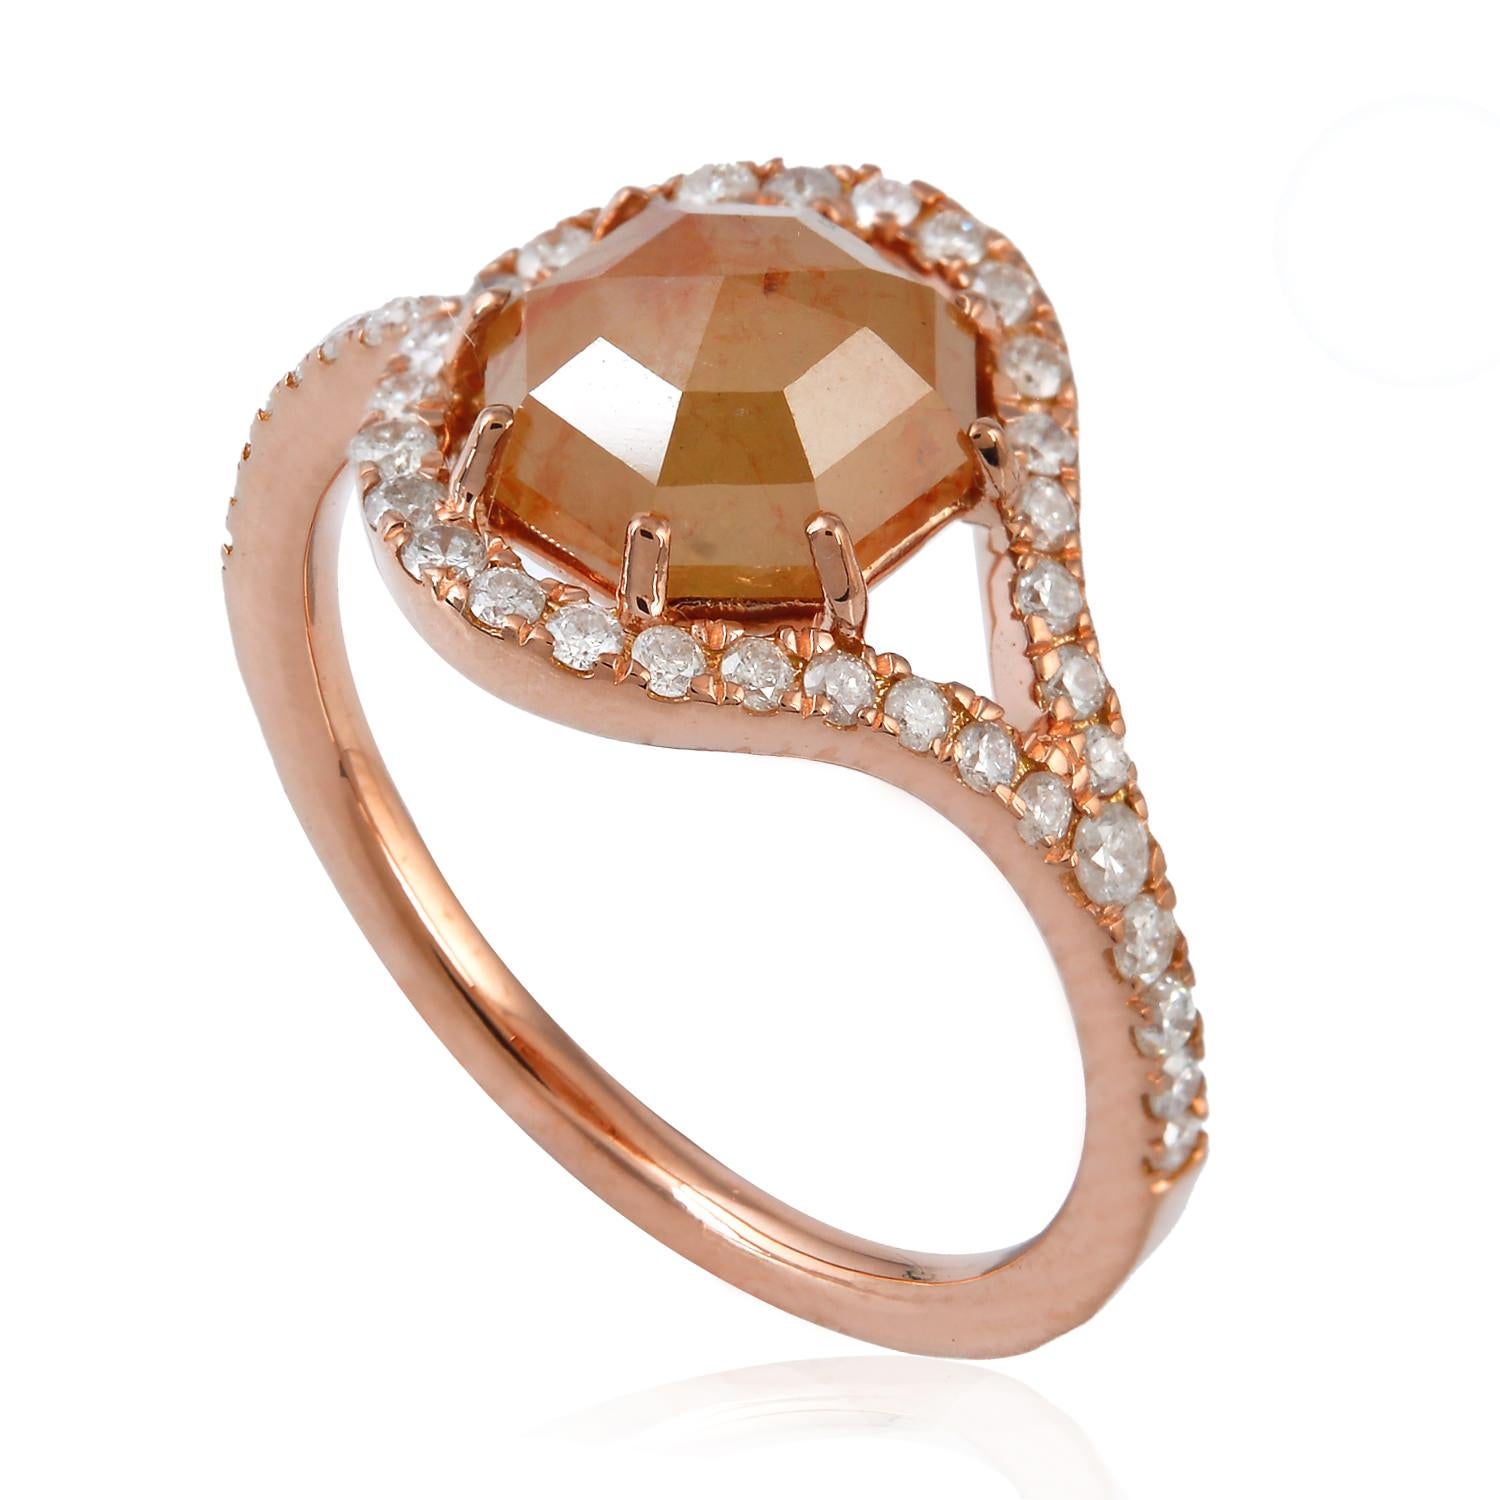 Art Deco Ice Diamond Cocktail Ring Surrounded By Diamonds Made In 18k Rose Gold For Sale